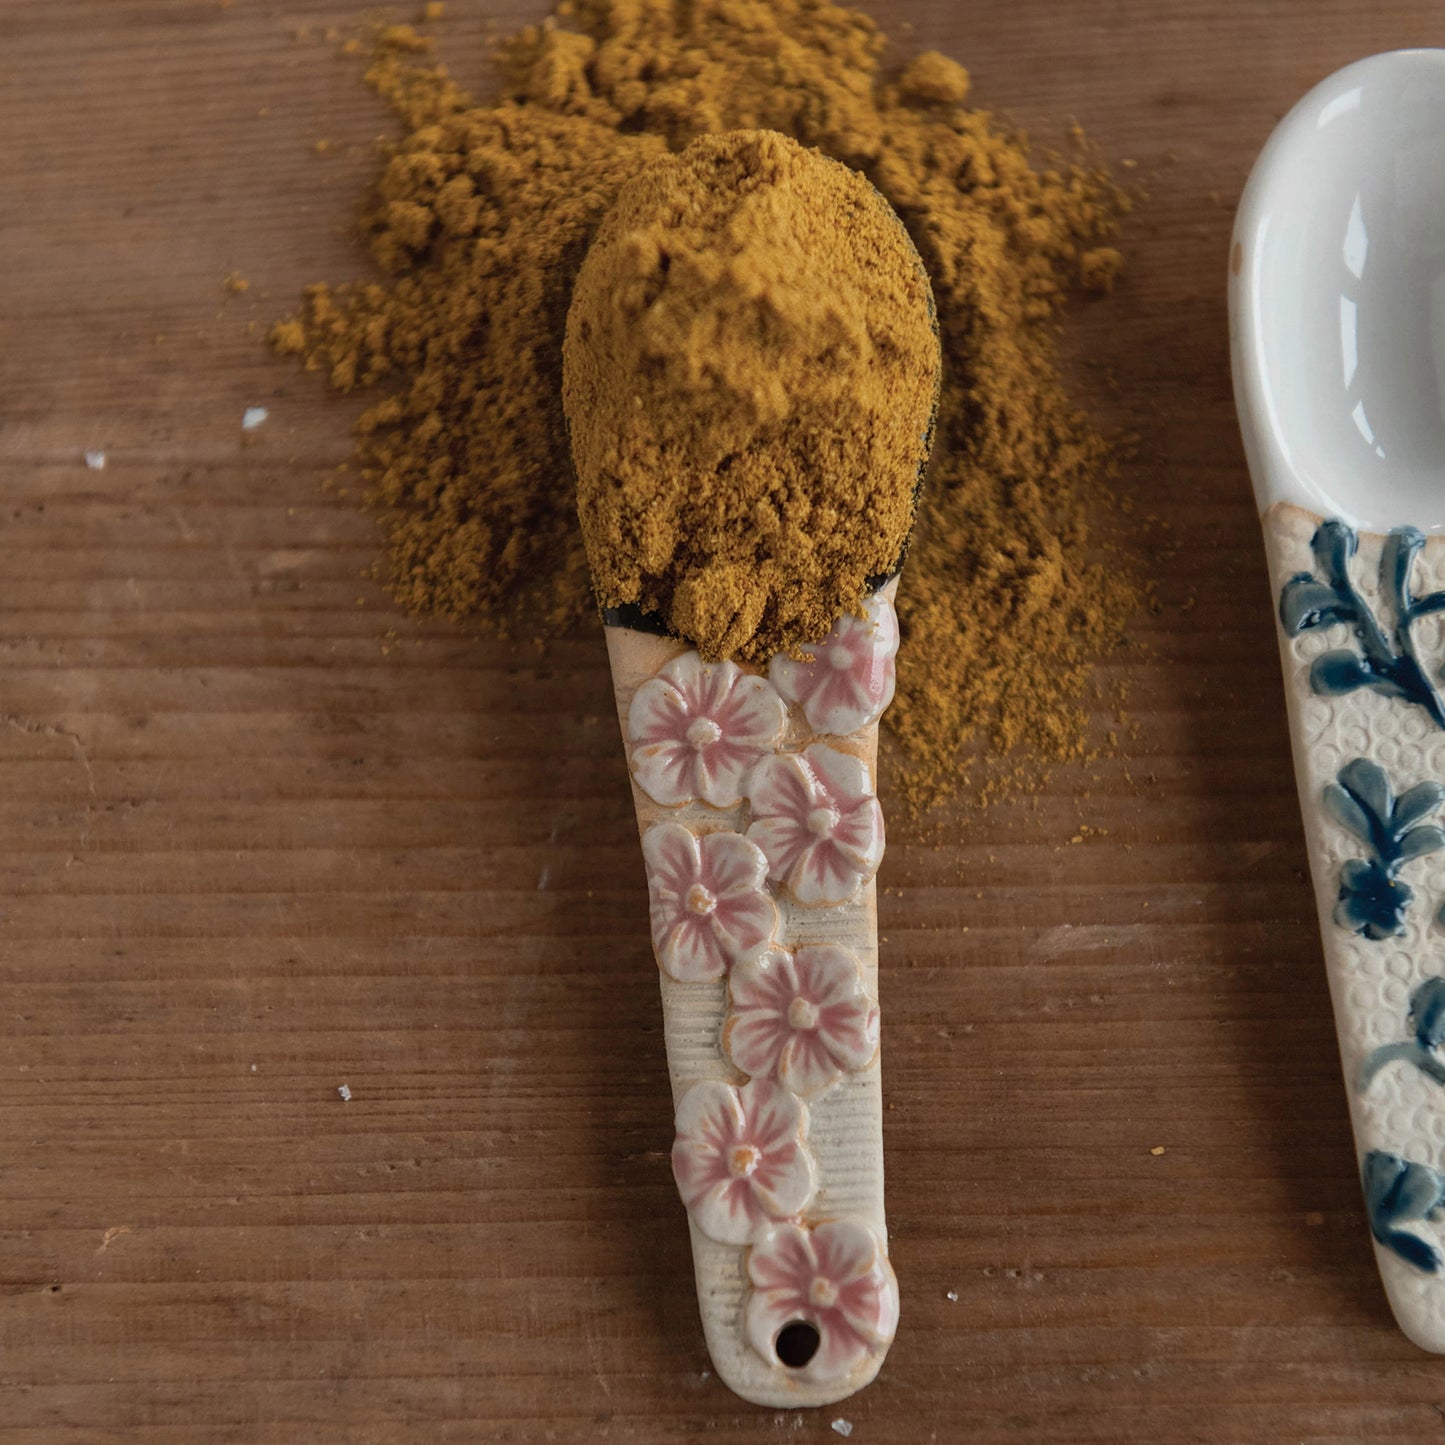 Hand-Painted Spoon with Handle by Creative Co-Op in Various Styles